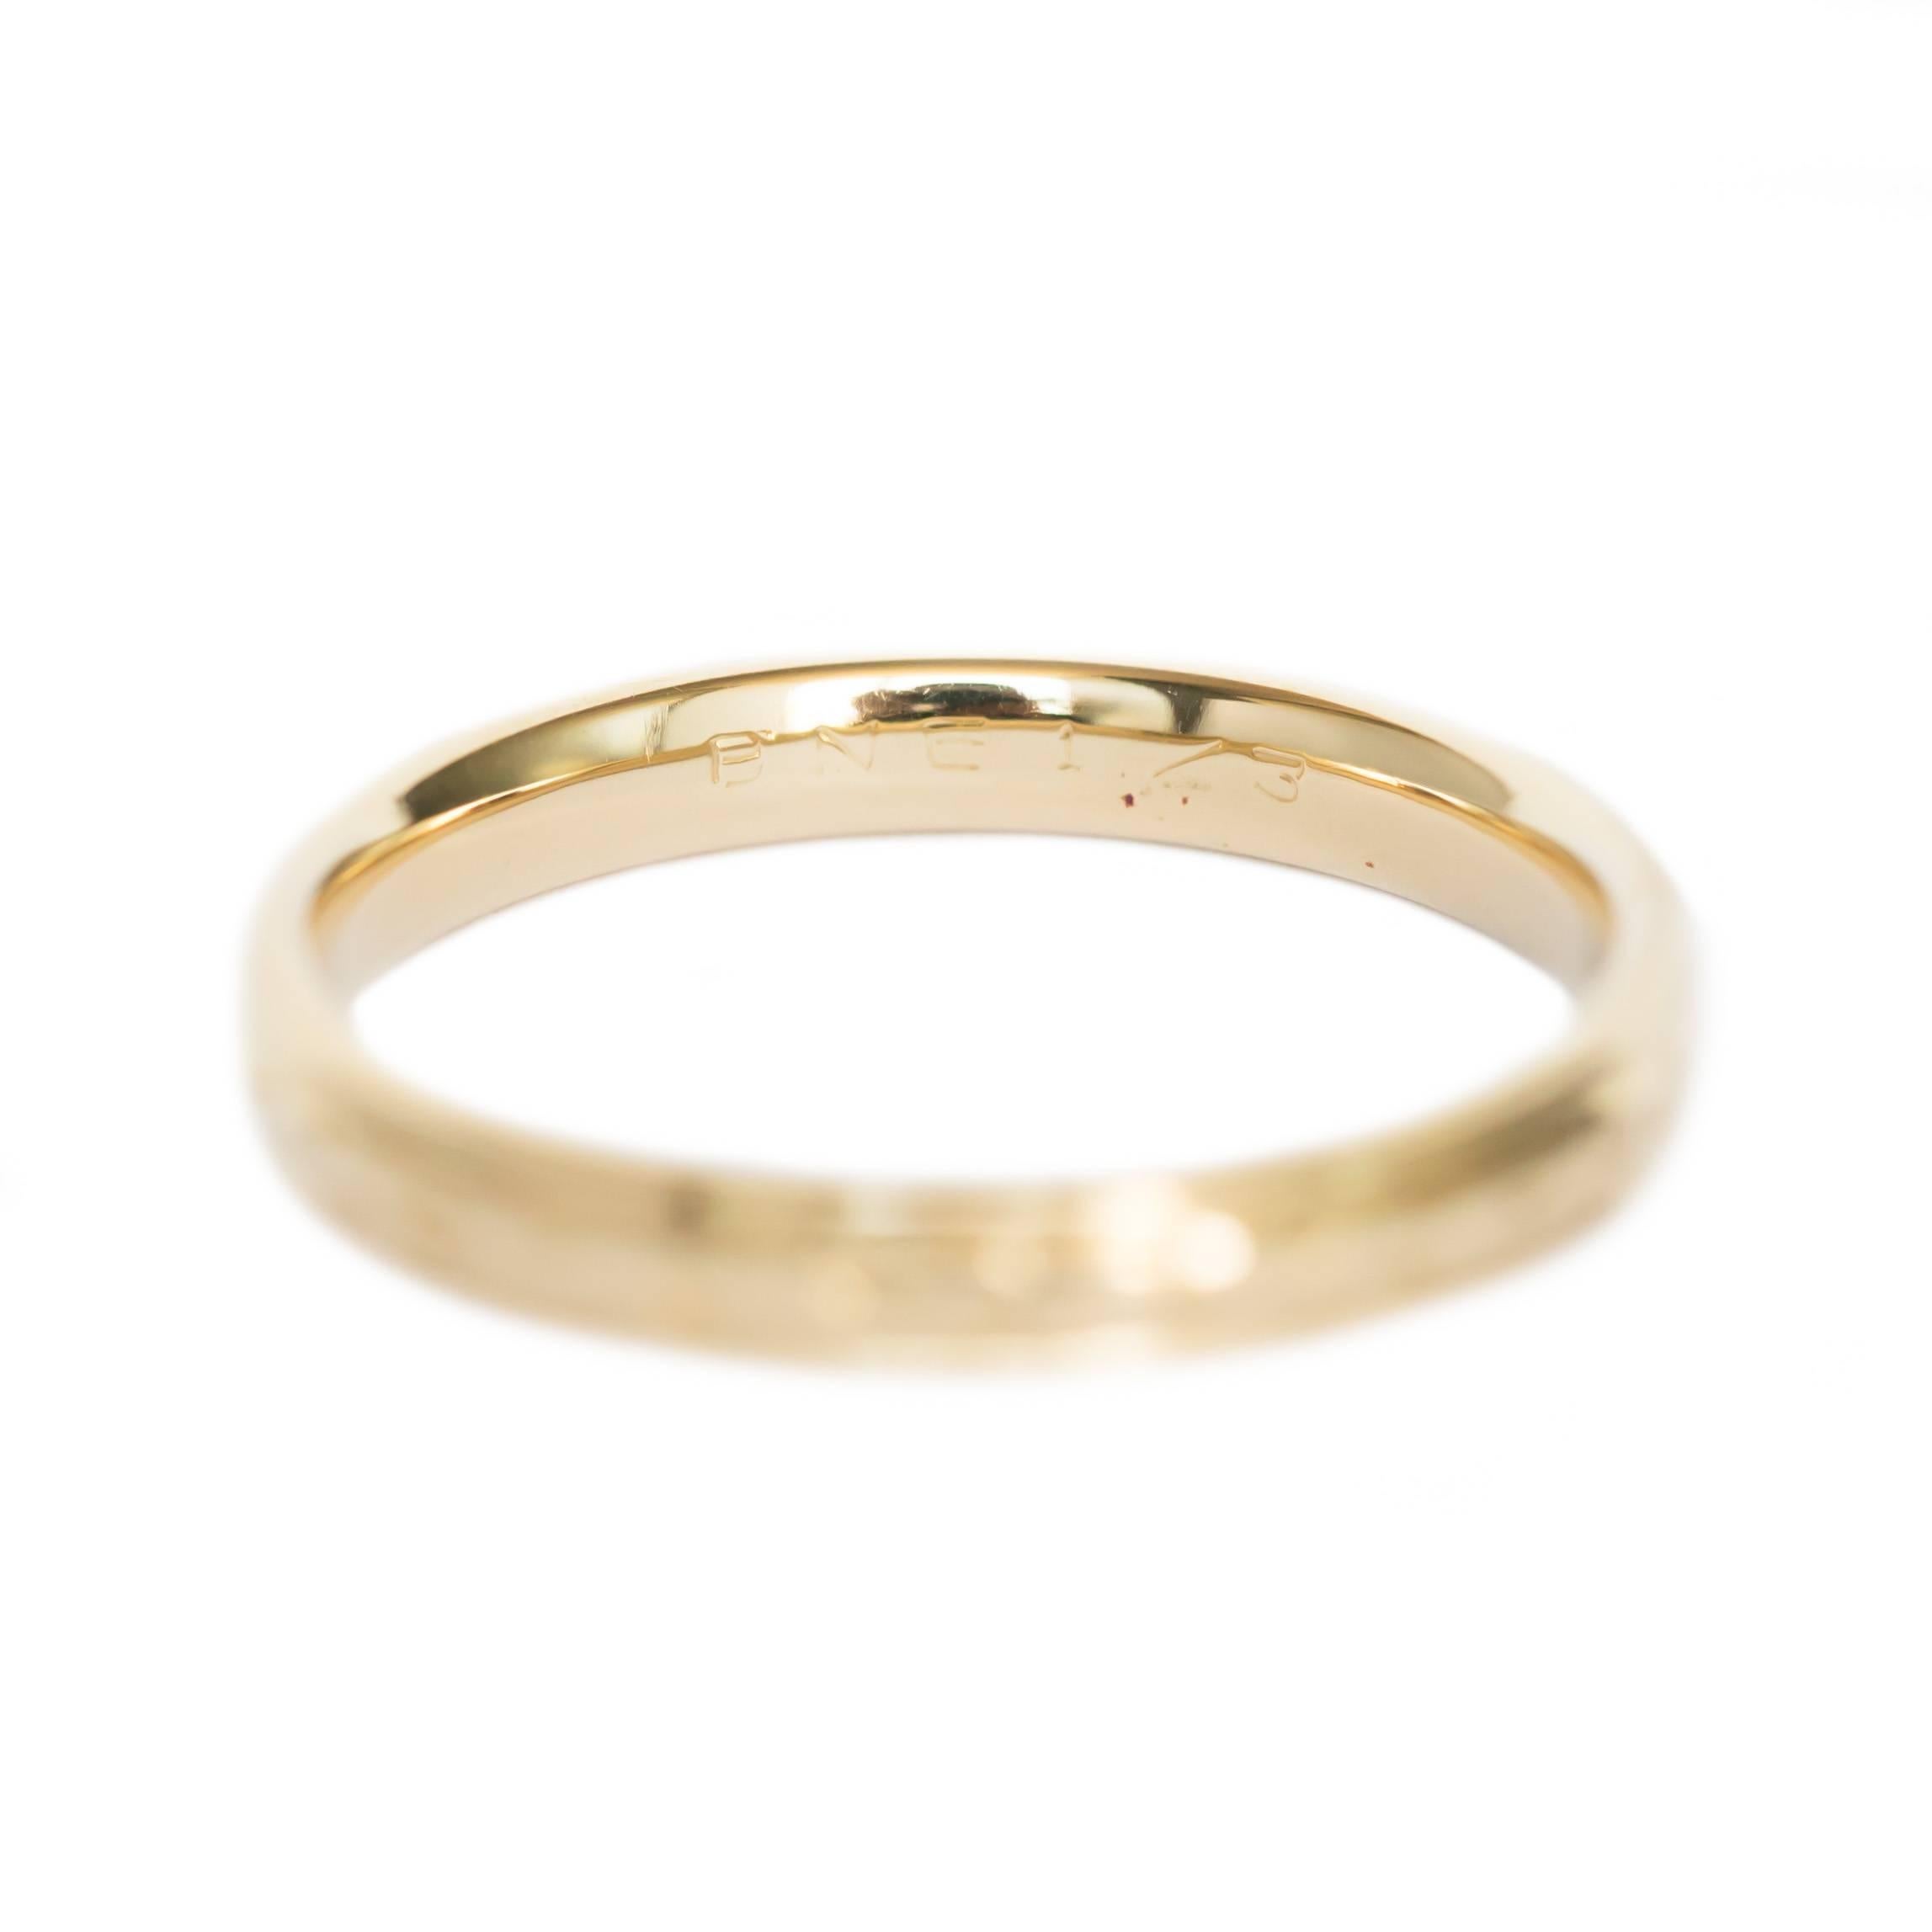 Item Details: 
Ring Size: Approximately 9.40
Metal Type: 14 Karat Yellow Gold
Weight: 4.0 grams

English Hallmarks on inner band

Width of band: 3.55mm
Finger to Top of Stone Measurement: 1.83mm